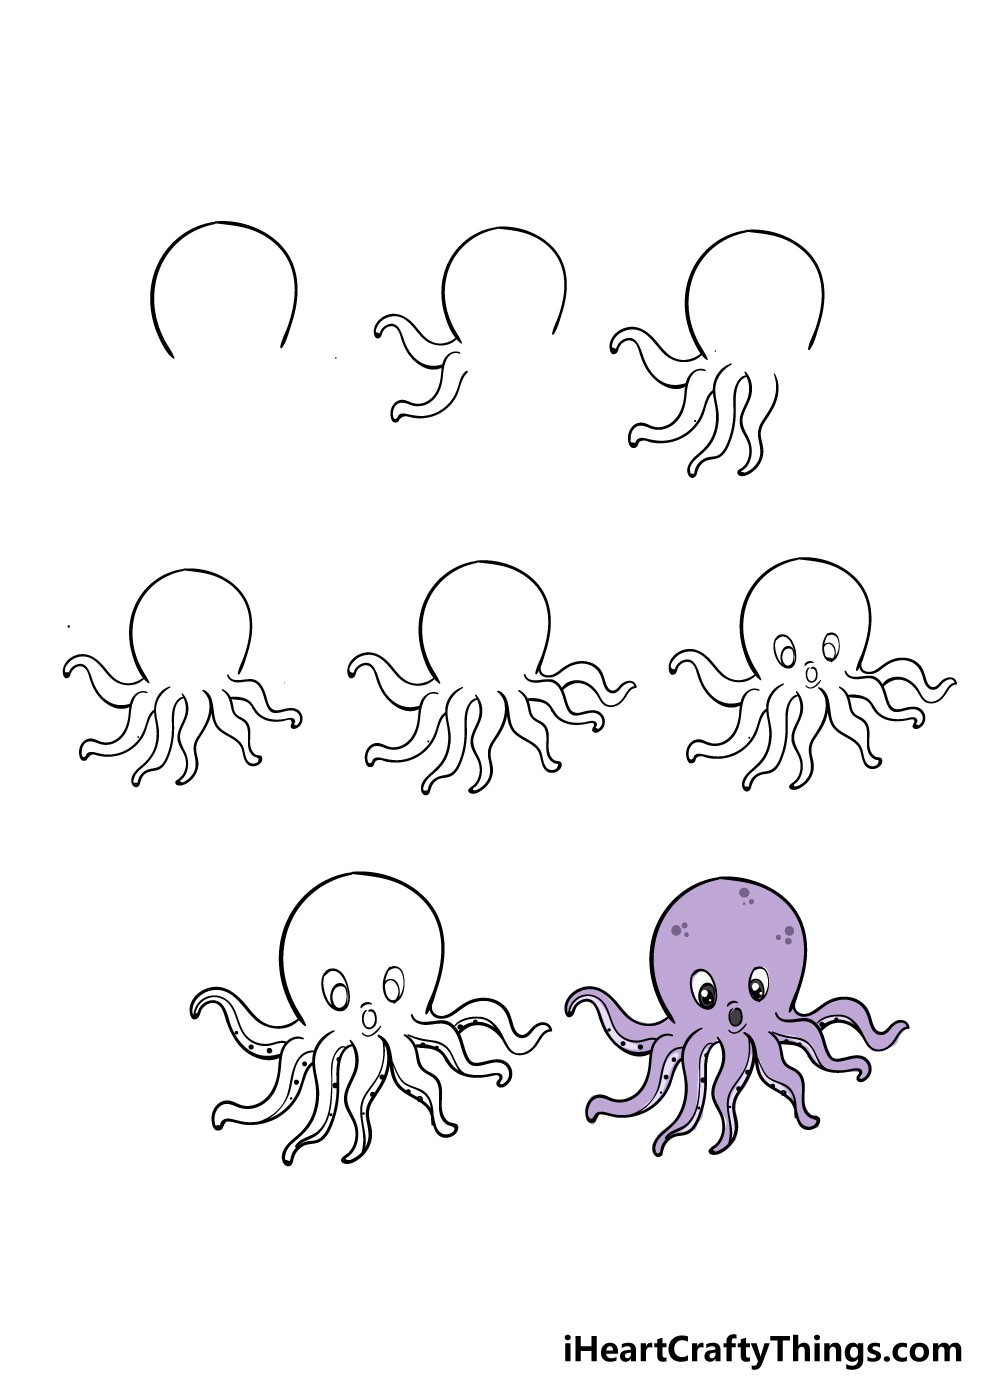 A simple octopus Drawing Ideas